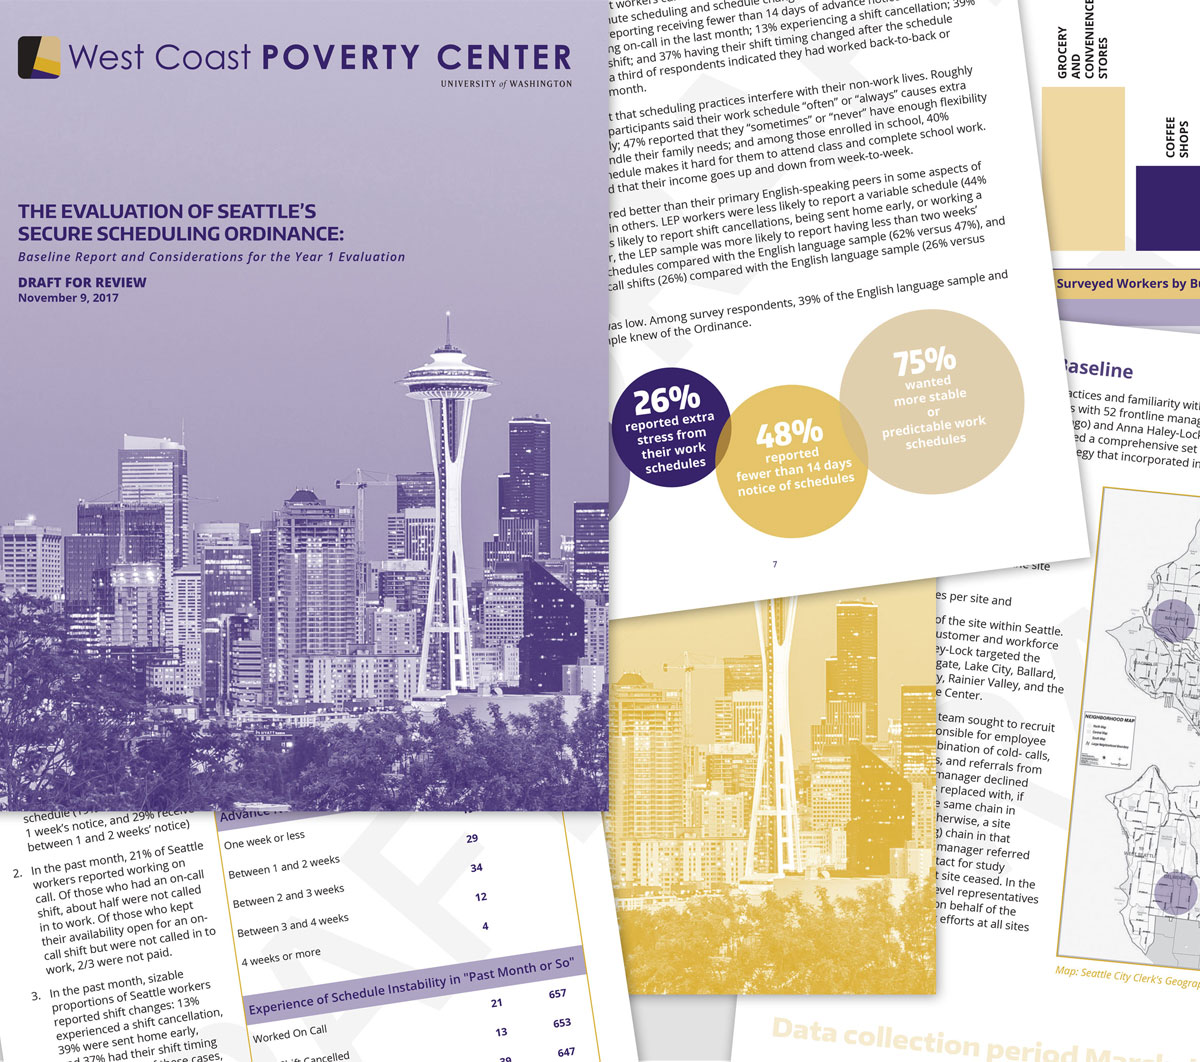 West Coast Poverty Center Report image